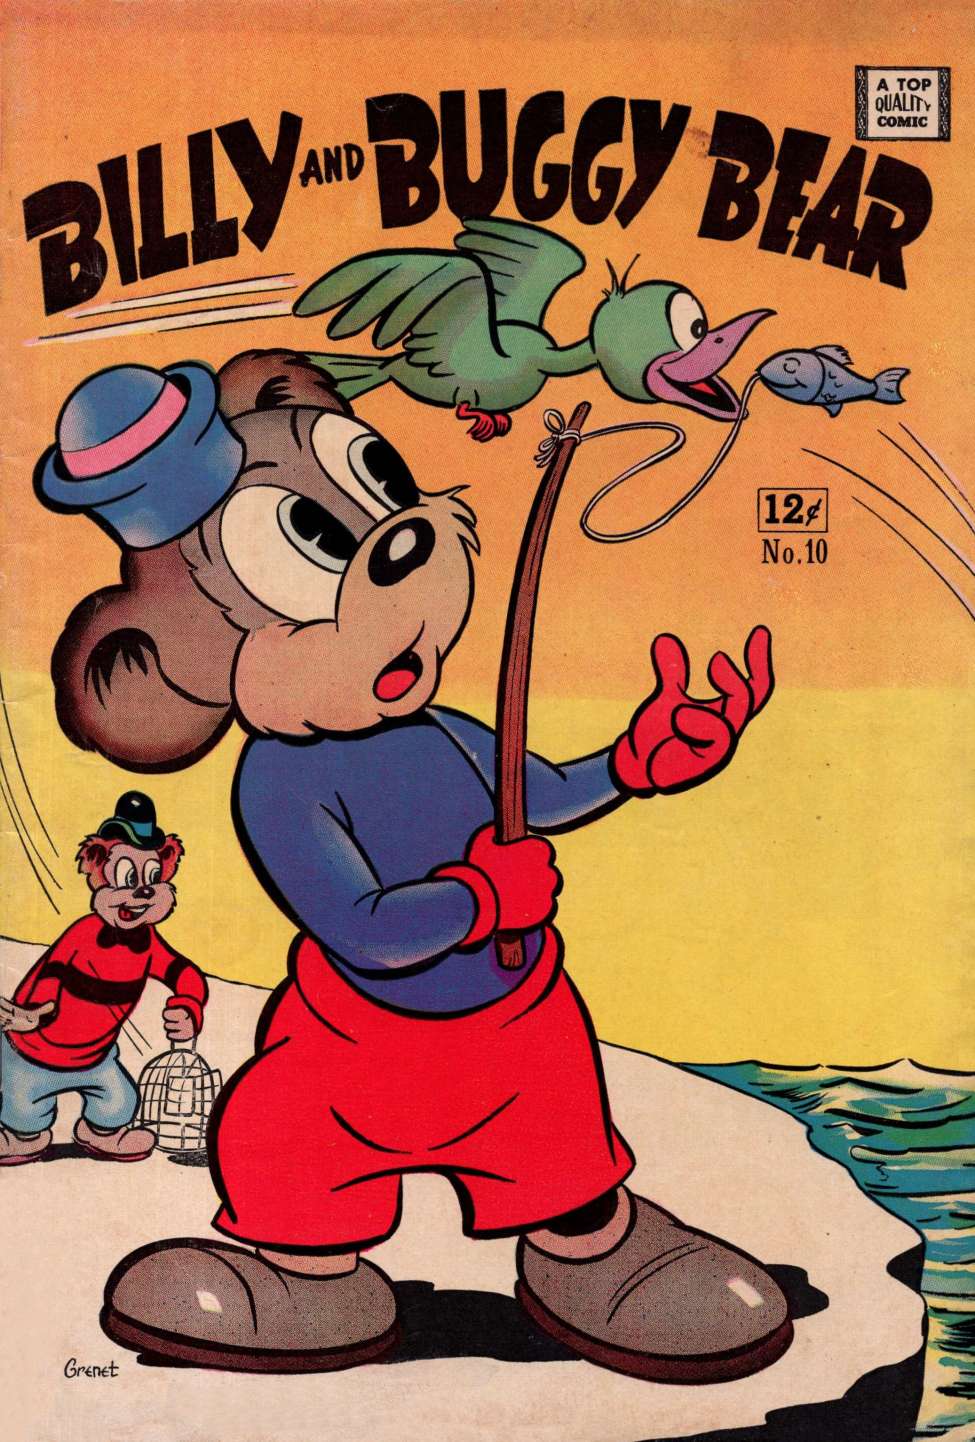 Comic Book Cover For Billy and Buggy Bear 10